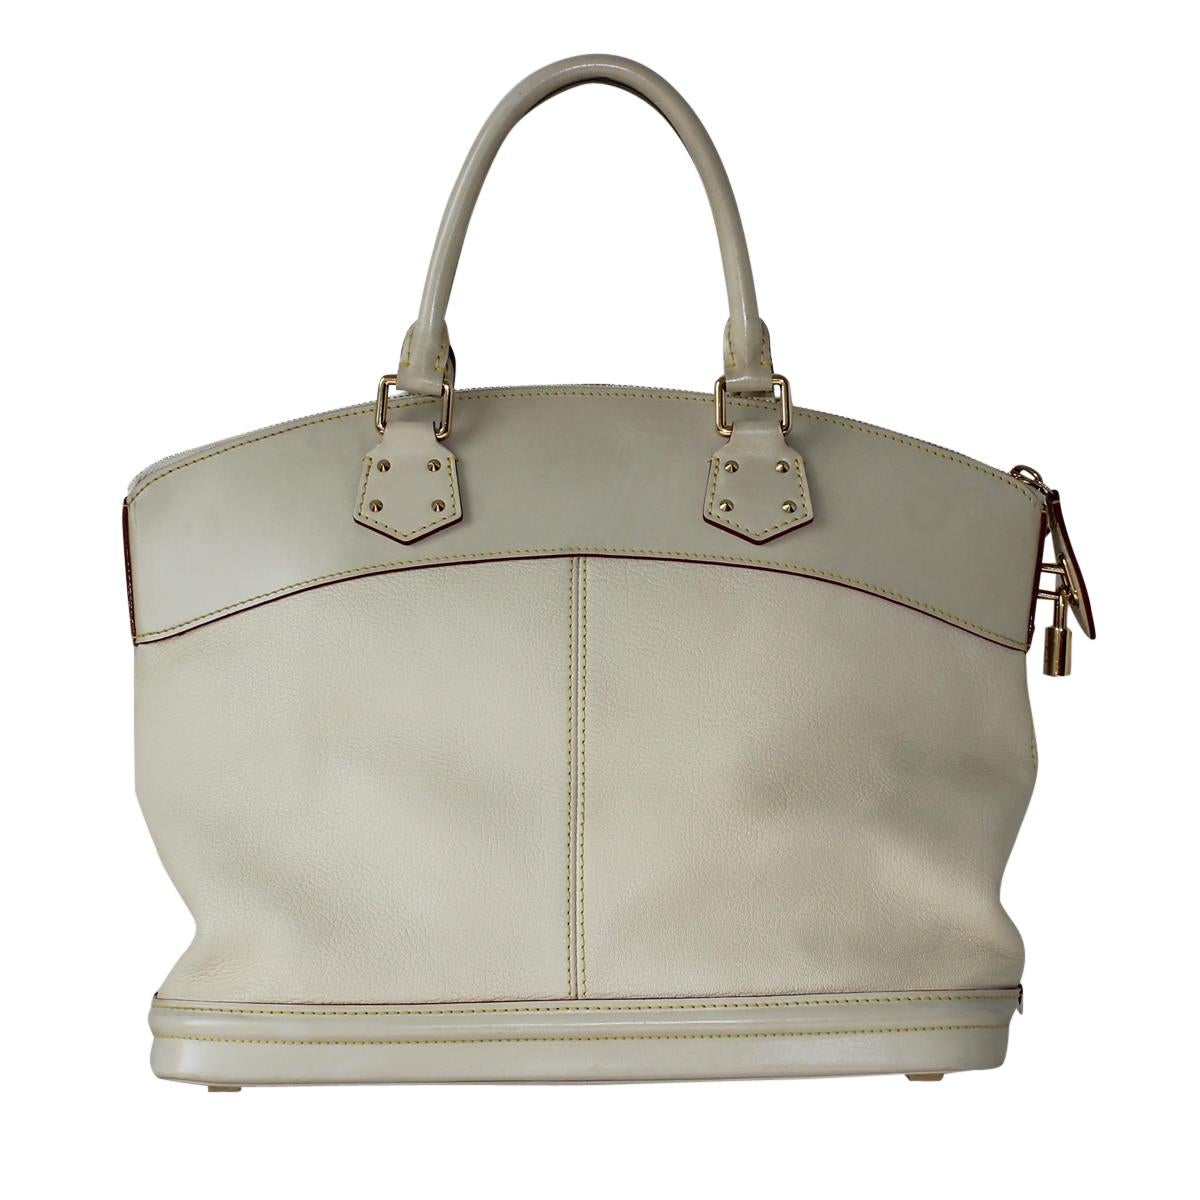 Very chic LV bag
2010 collection
Cream color
Two handles
Golden metal padlock
One internal pocket with zip
Two additional internal pockets
Cm 30 x 39 x 18 (11.81 x 15.35 x 7.08 inches)
With dustbag
Worldwide express shipping included in the price !